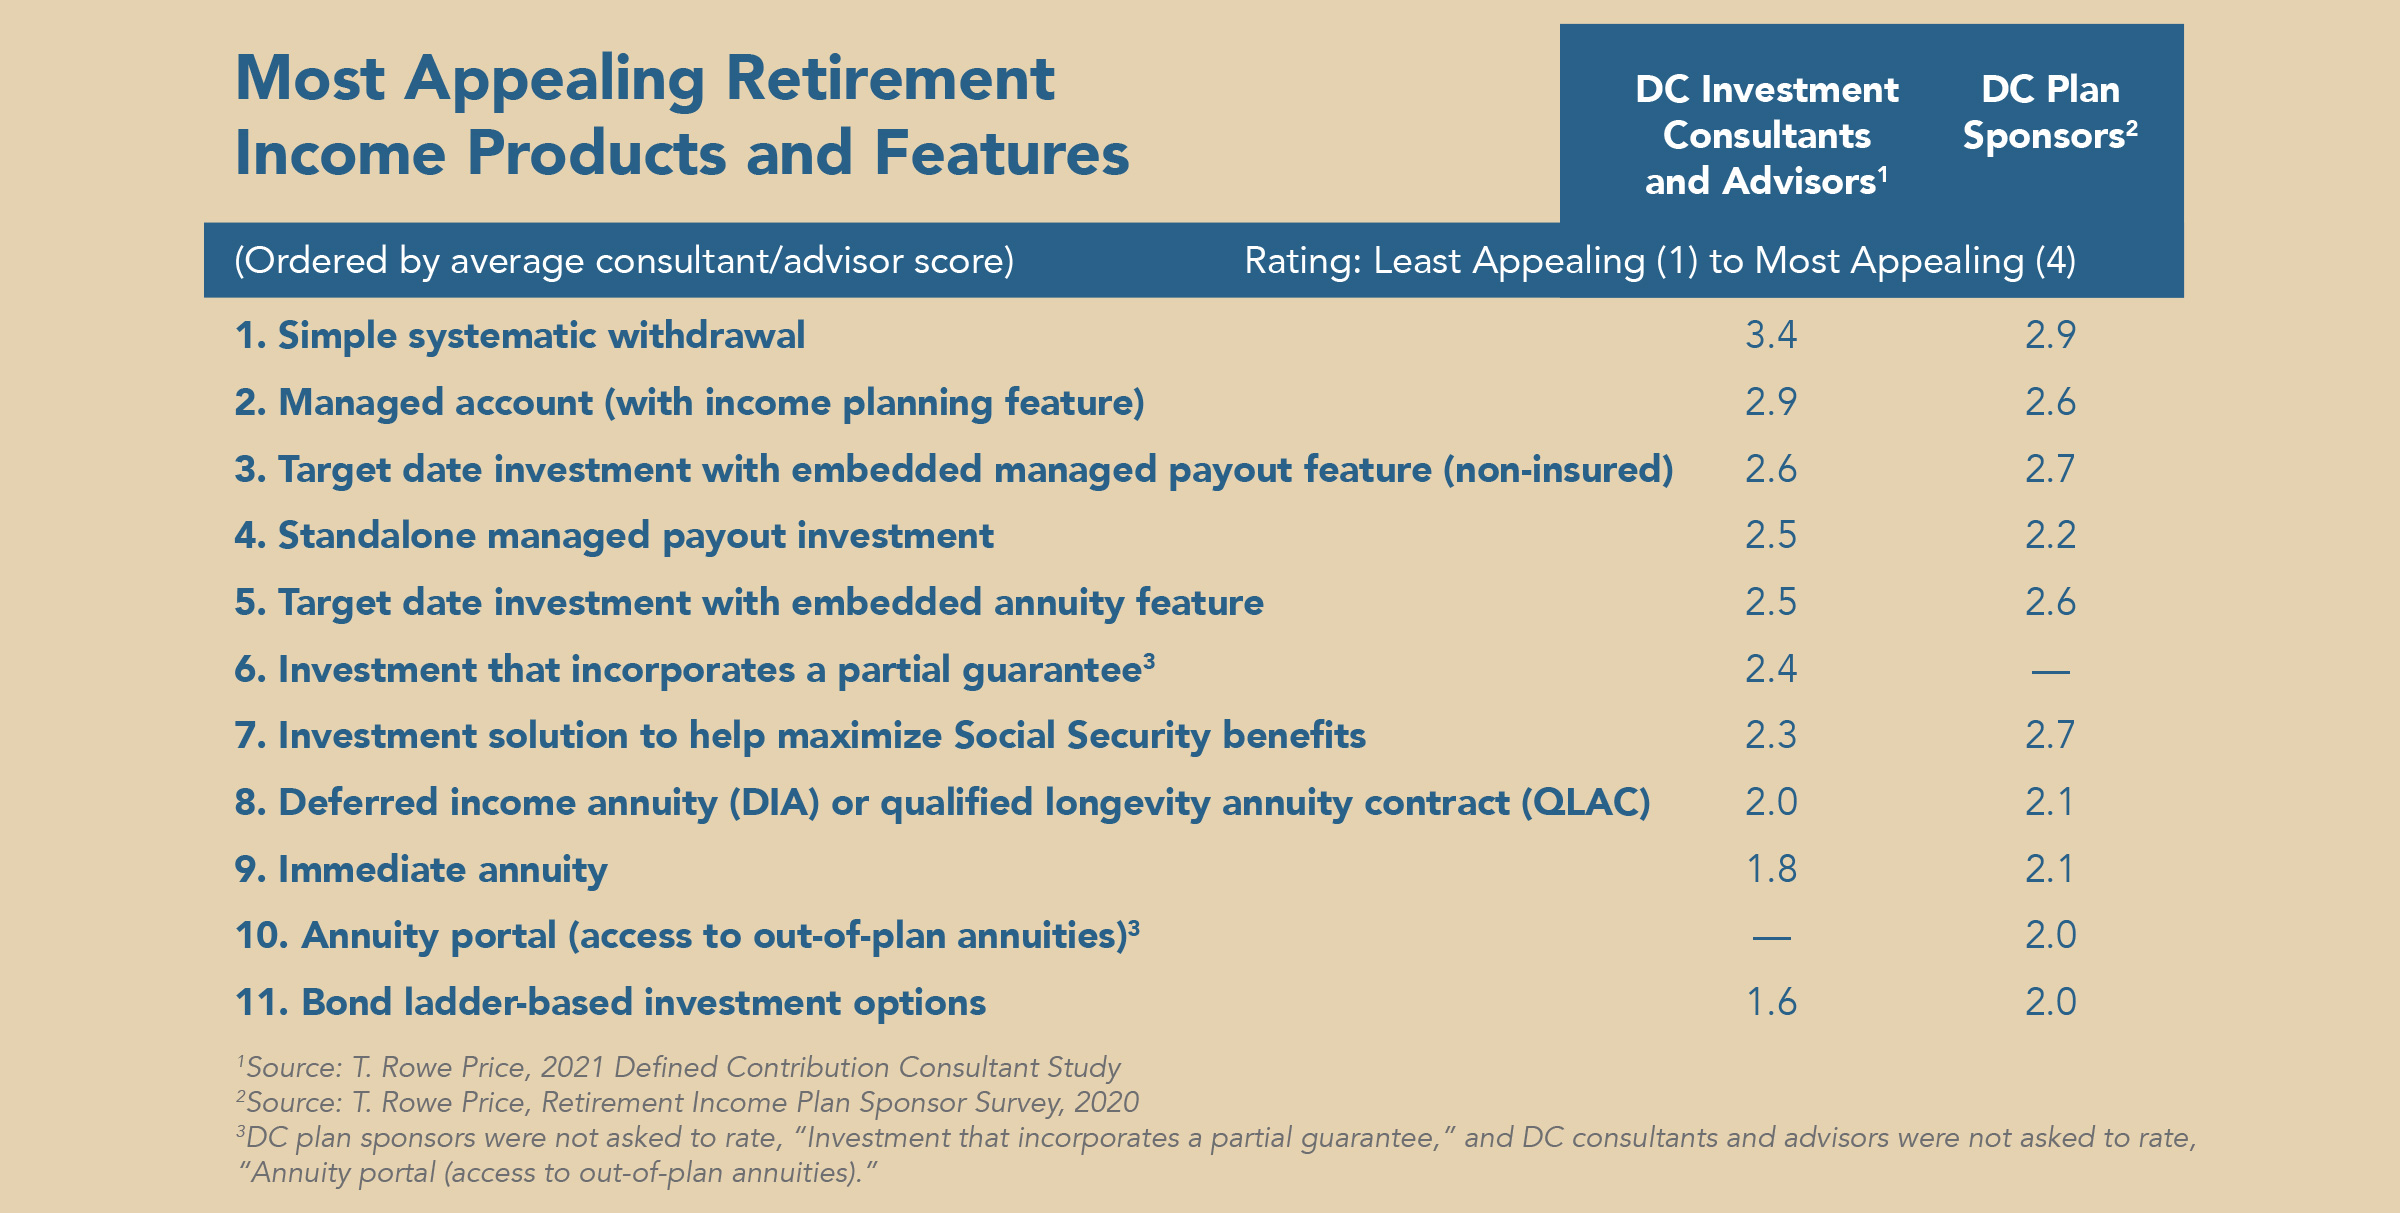 Most appealing retirement income products and features